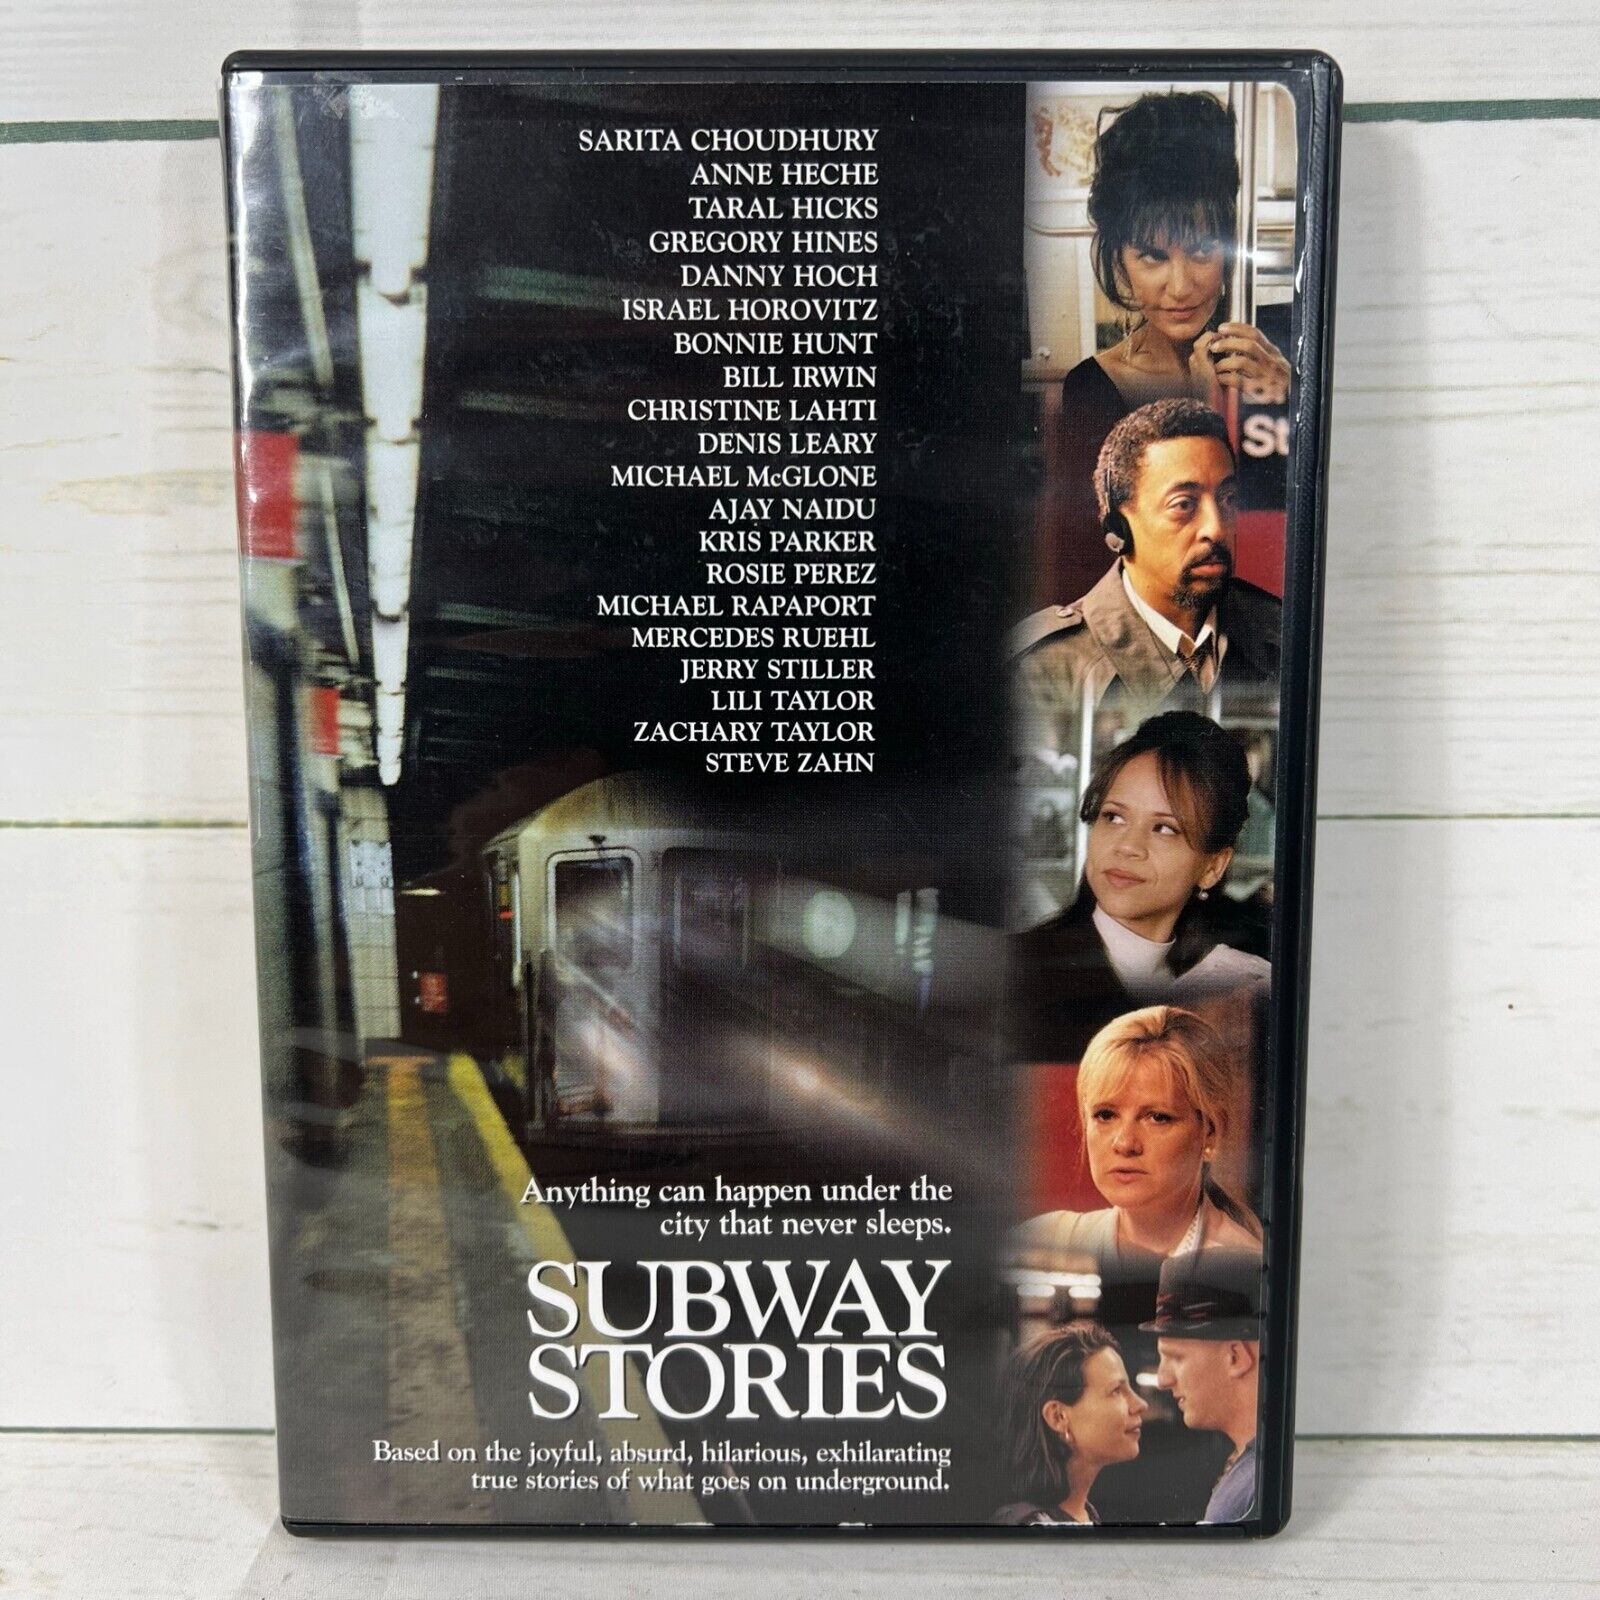 david urich recommends rosie perez subway stories pic